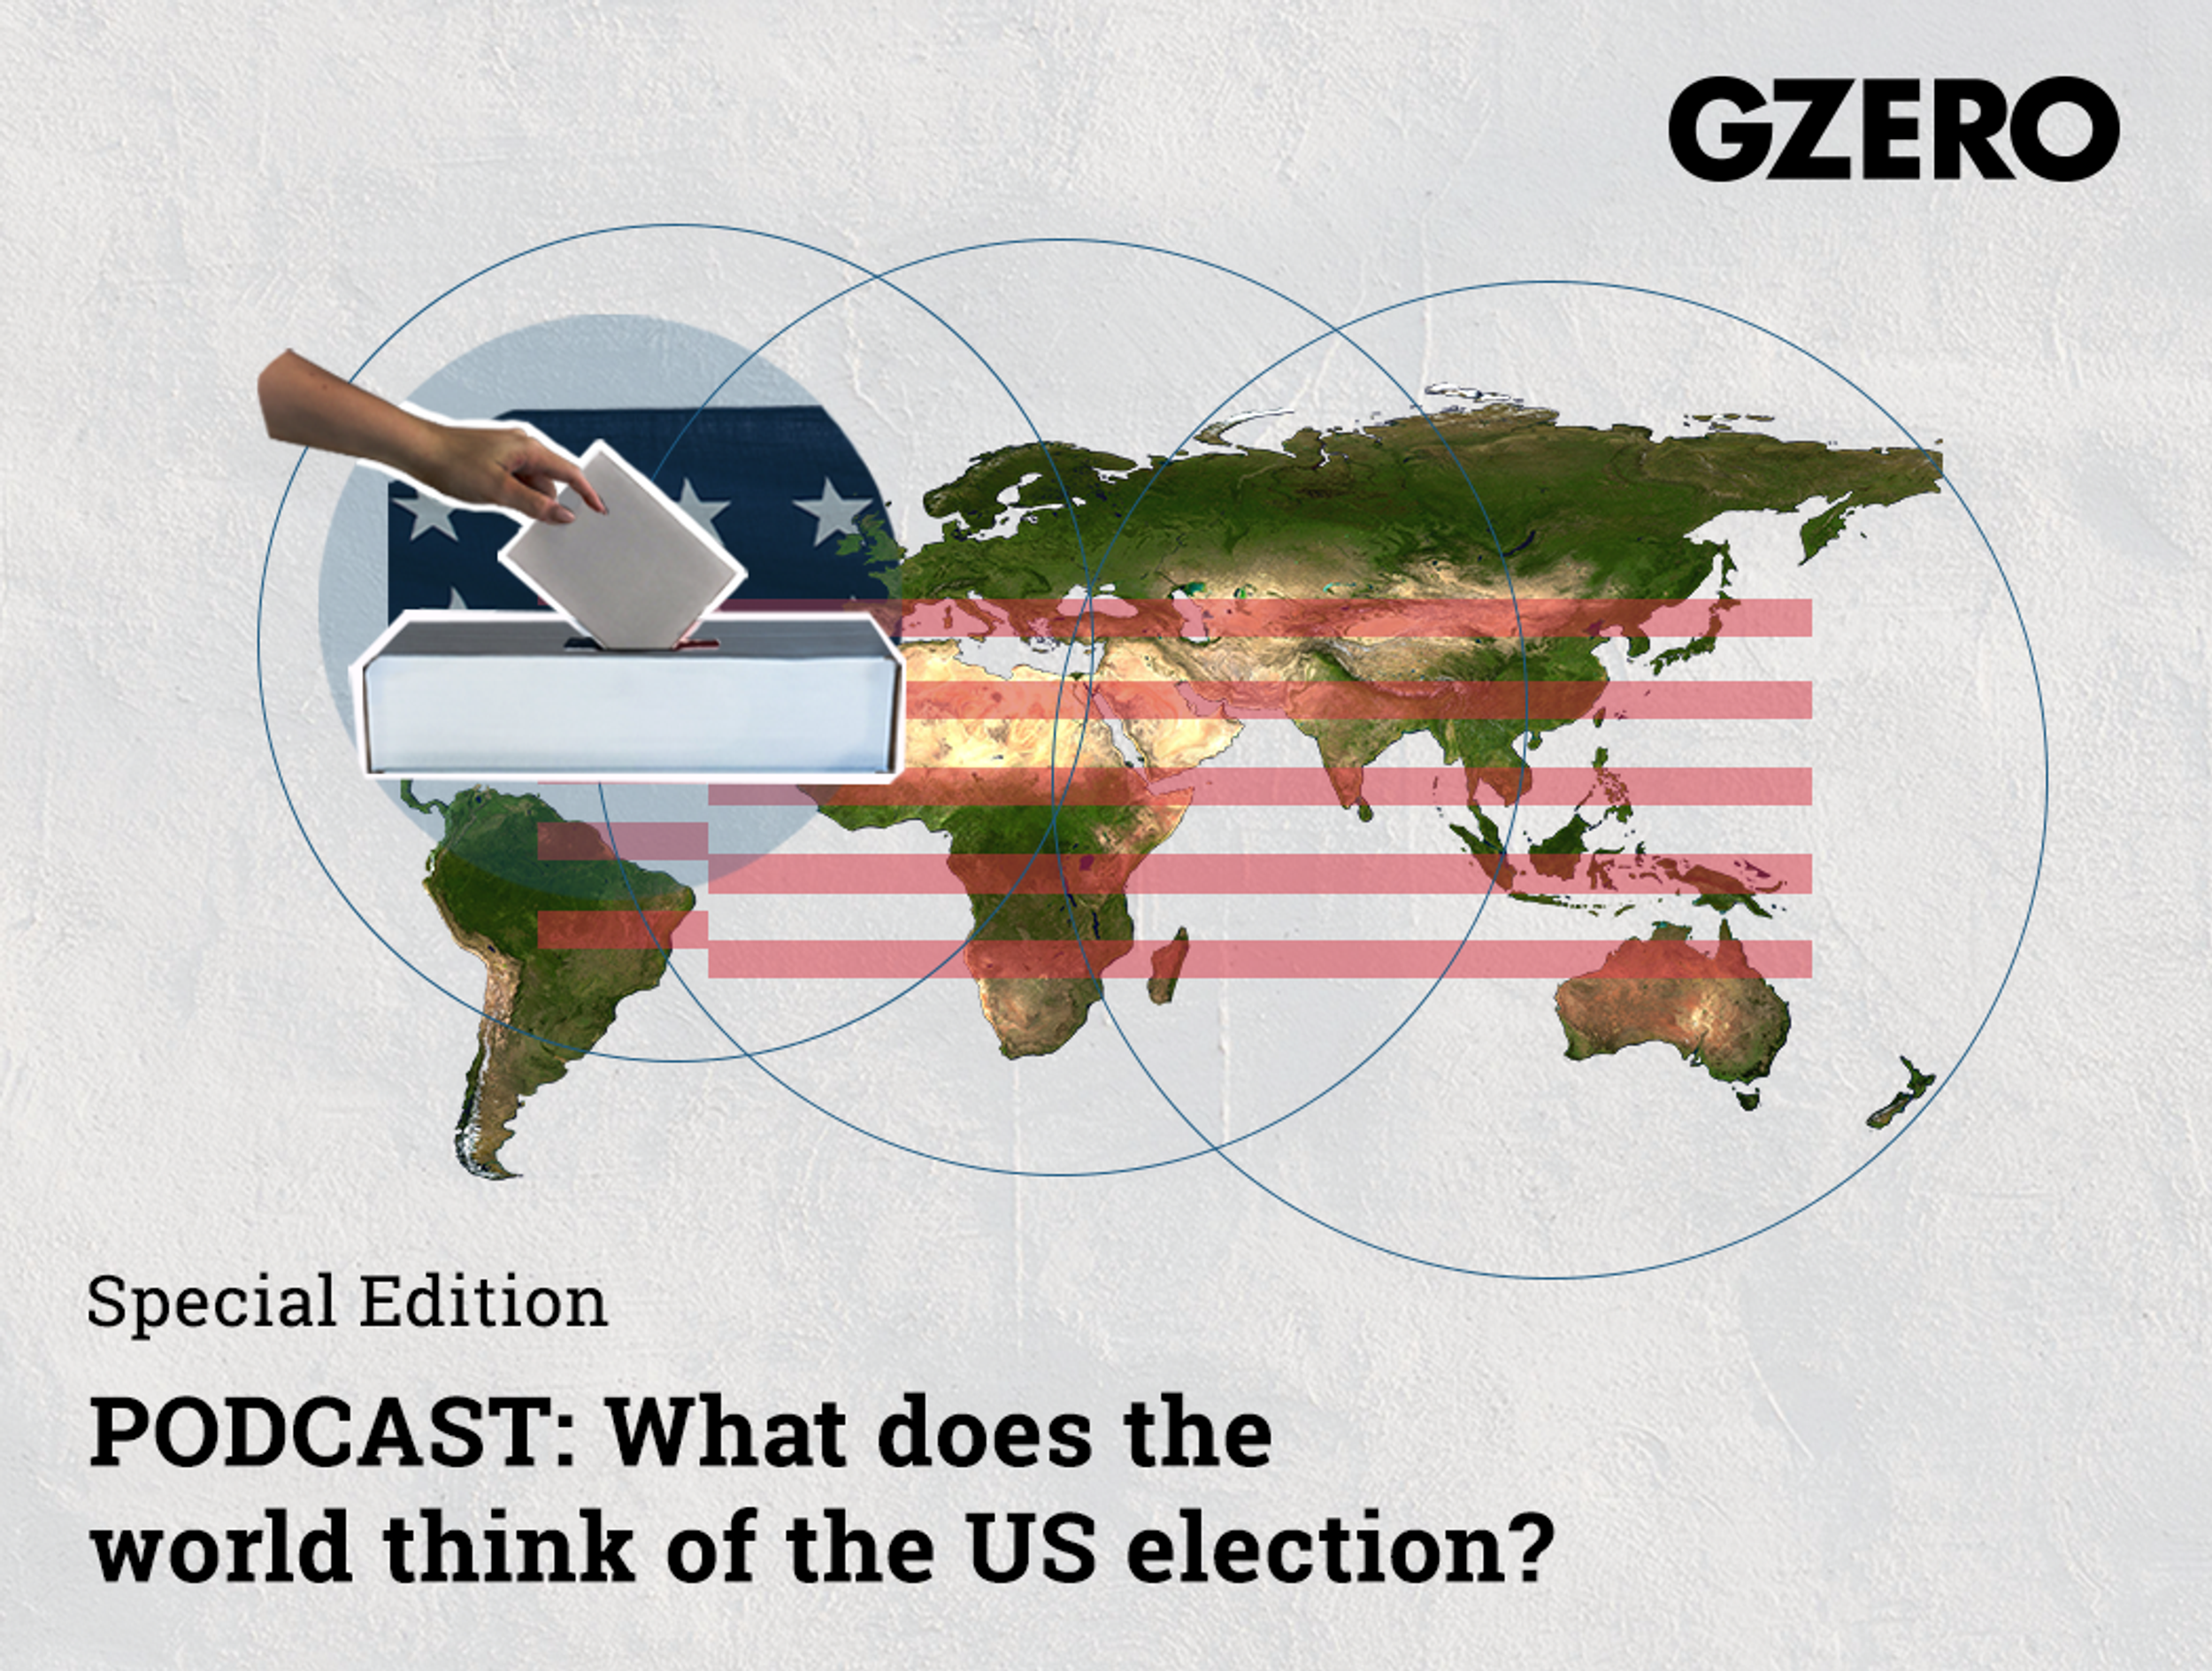 Podcast: What does the world think of the US election?